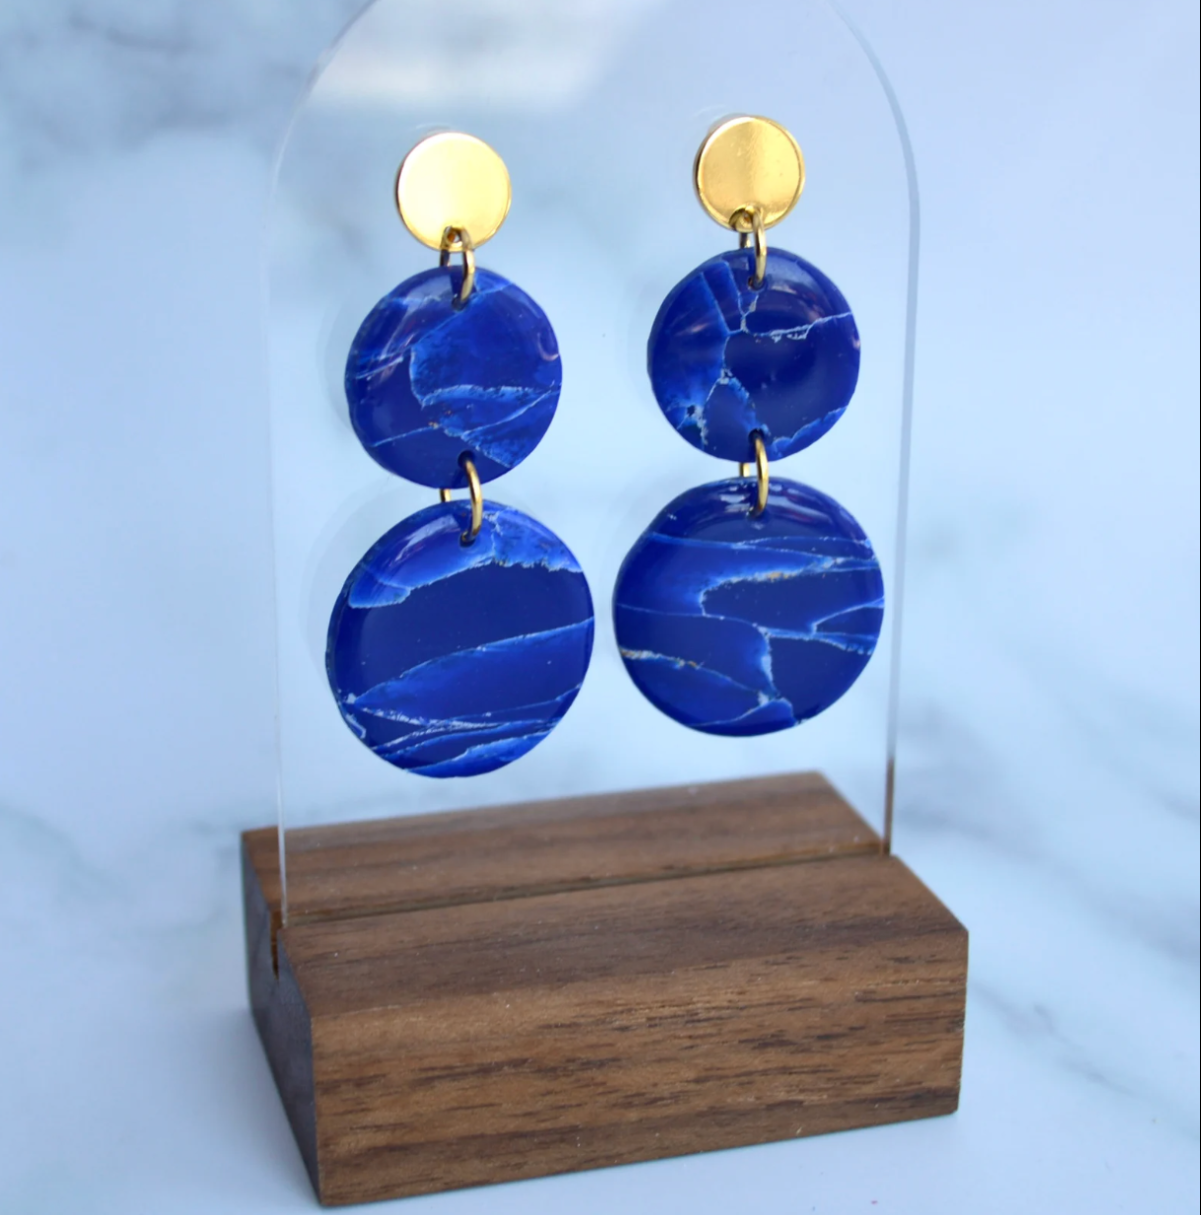 A pair of lapis lazuli earrings from Pache Studios on Etsy, one of the top black owned businesses